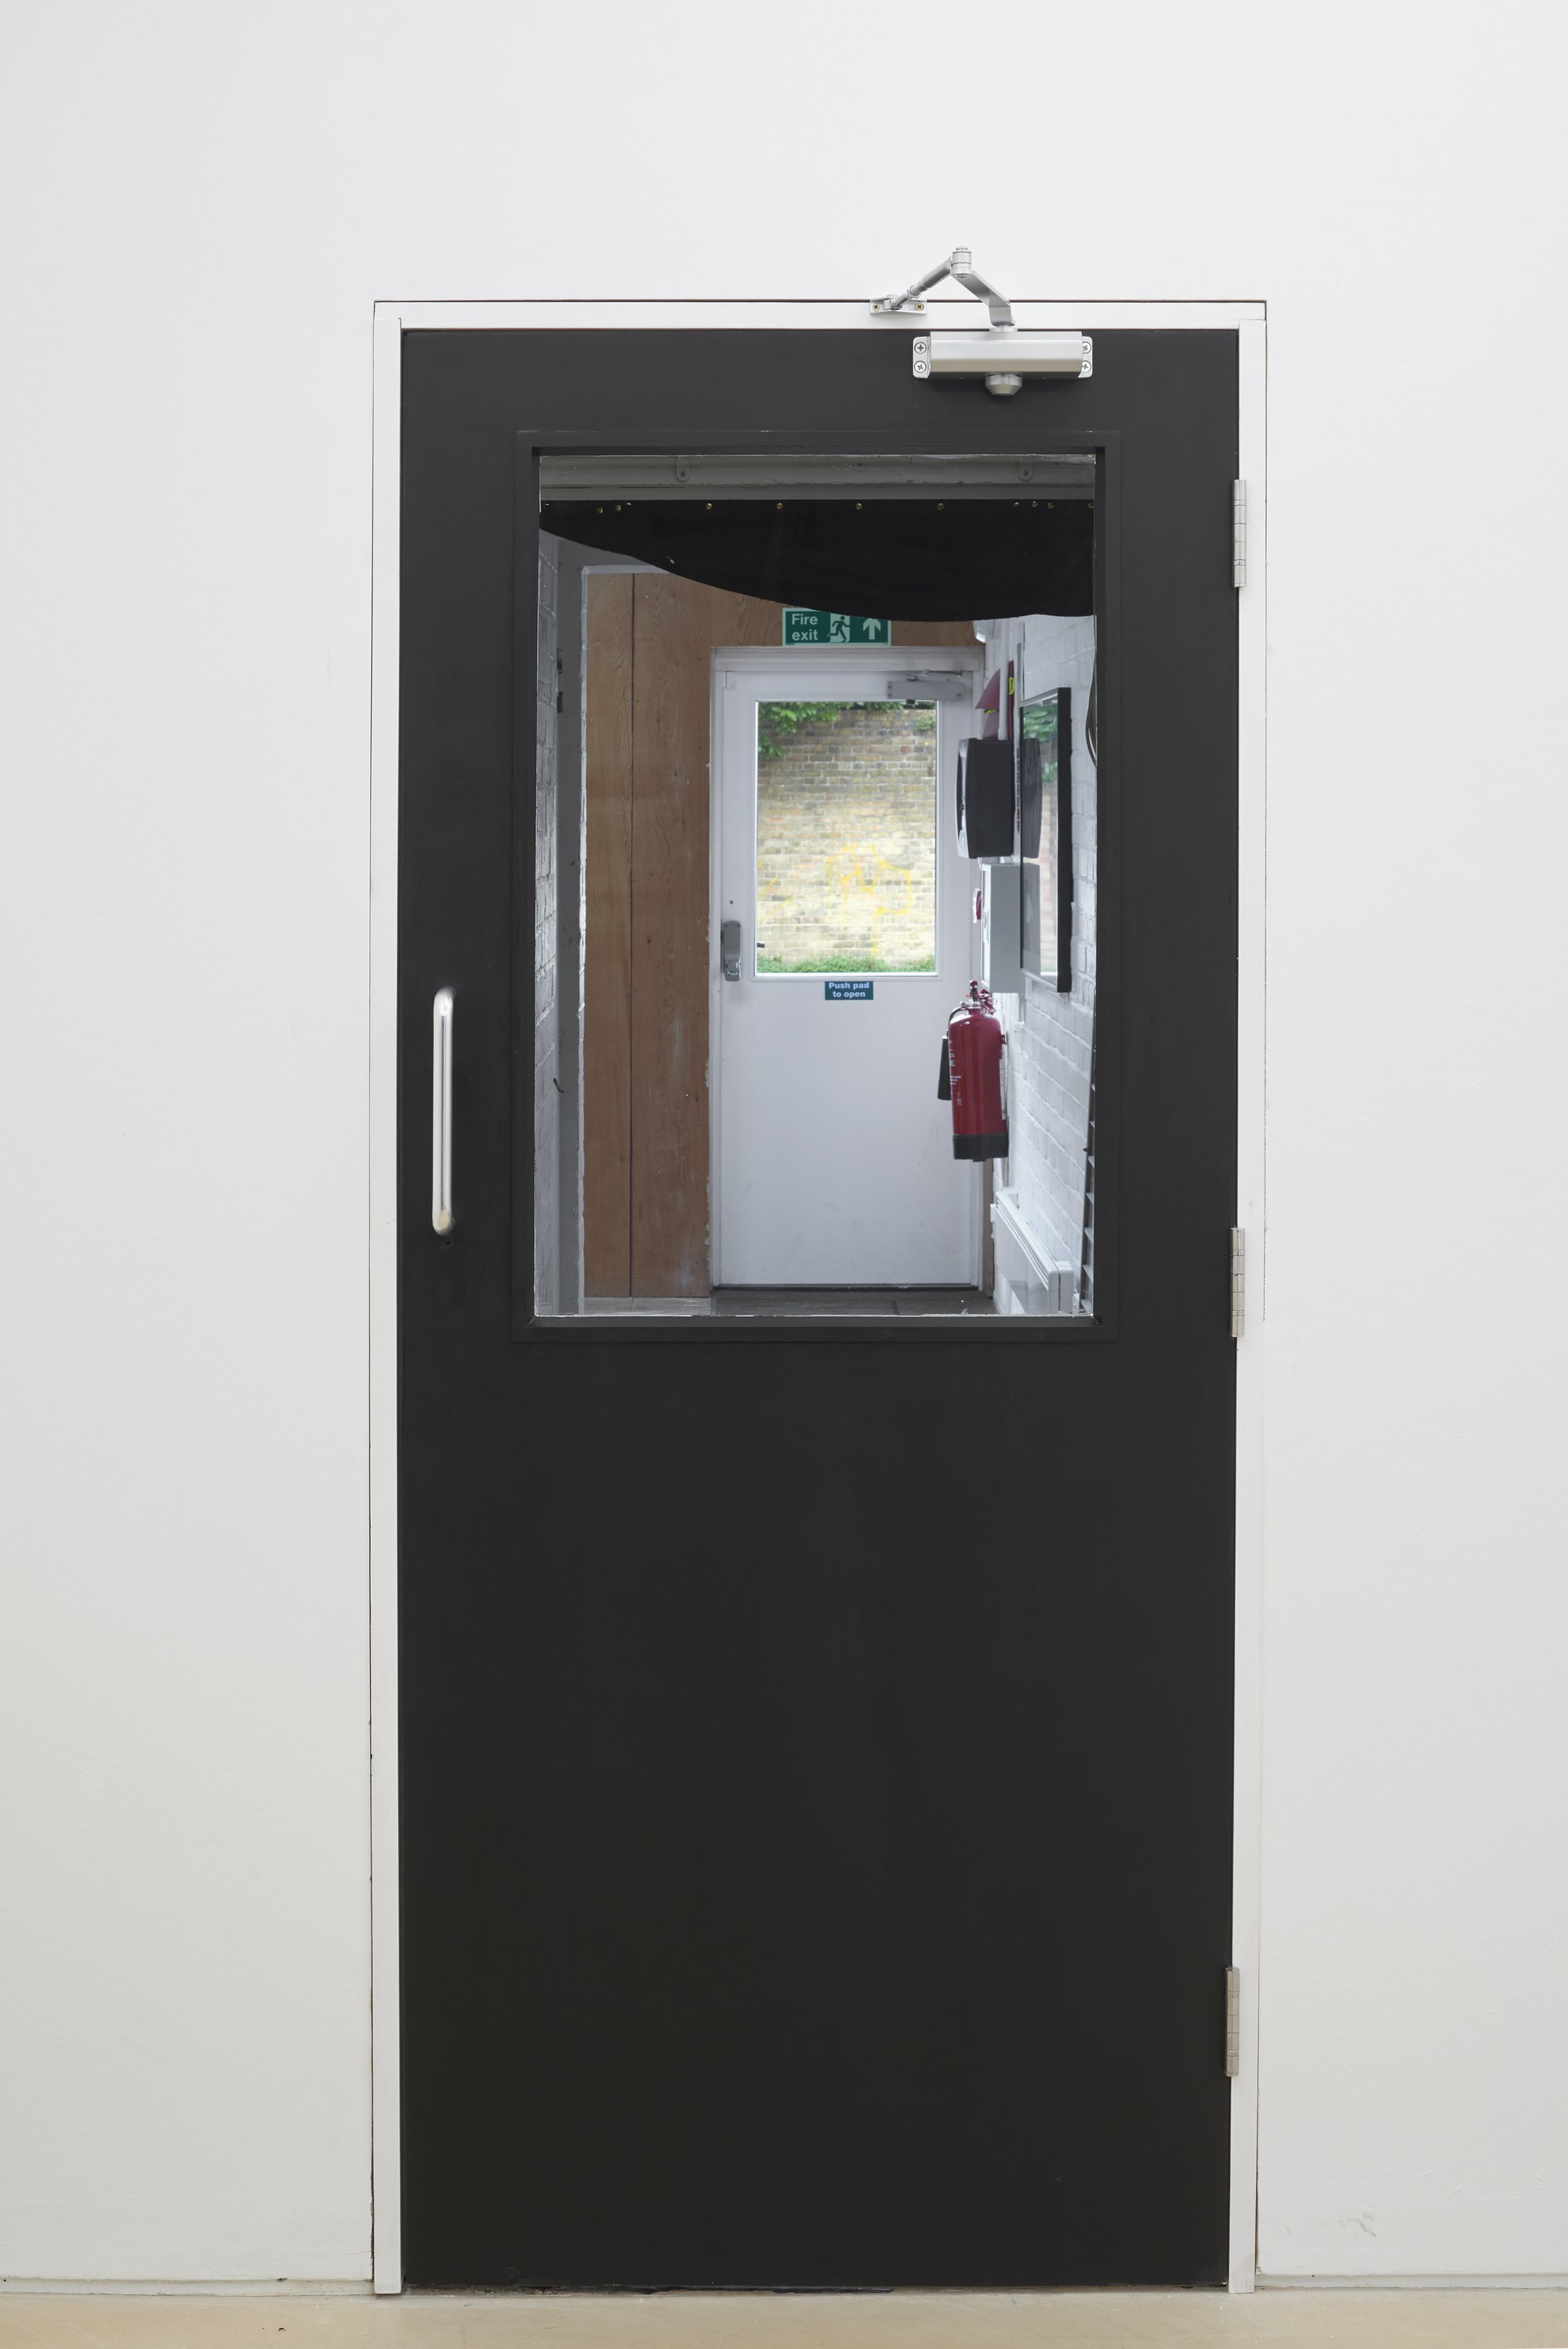 Iris Touliatou, KNOCK-OFF SECURITY RETROFIT, new doorway, Part Glazed Fire Door Complete with frame, glass, ironmongery and decorations in black Satinwood, fabricated and installed by JH Contract Services (Ltd), 198 x 89 x 98 x 83 cm, 2023Installation view, Iris Touliatou, Outfits, Peer, London, 2023.